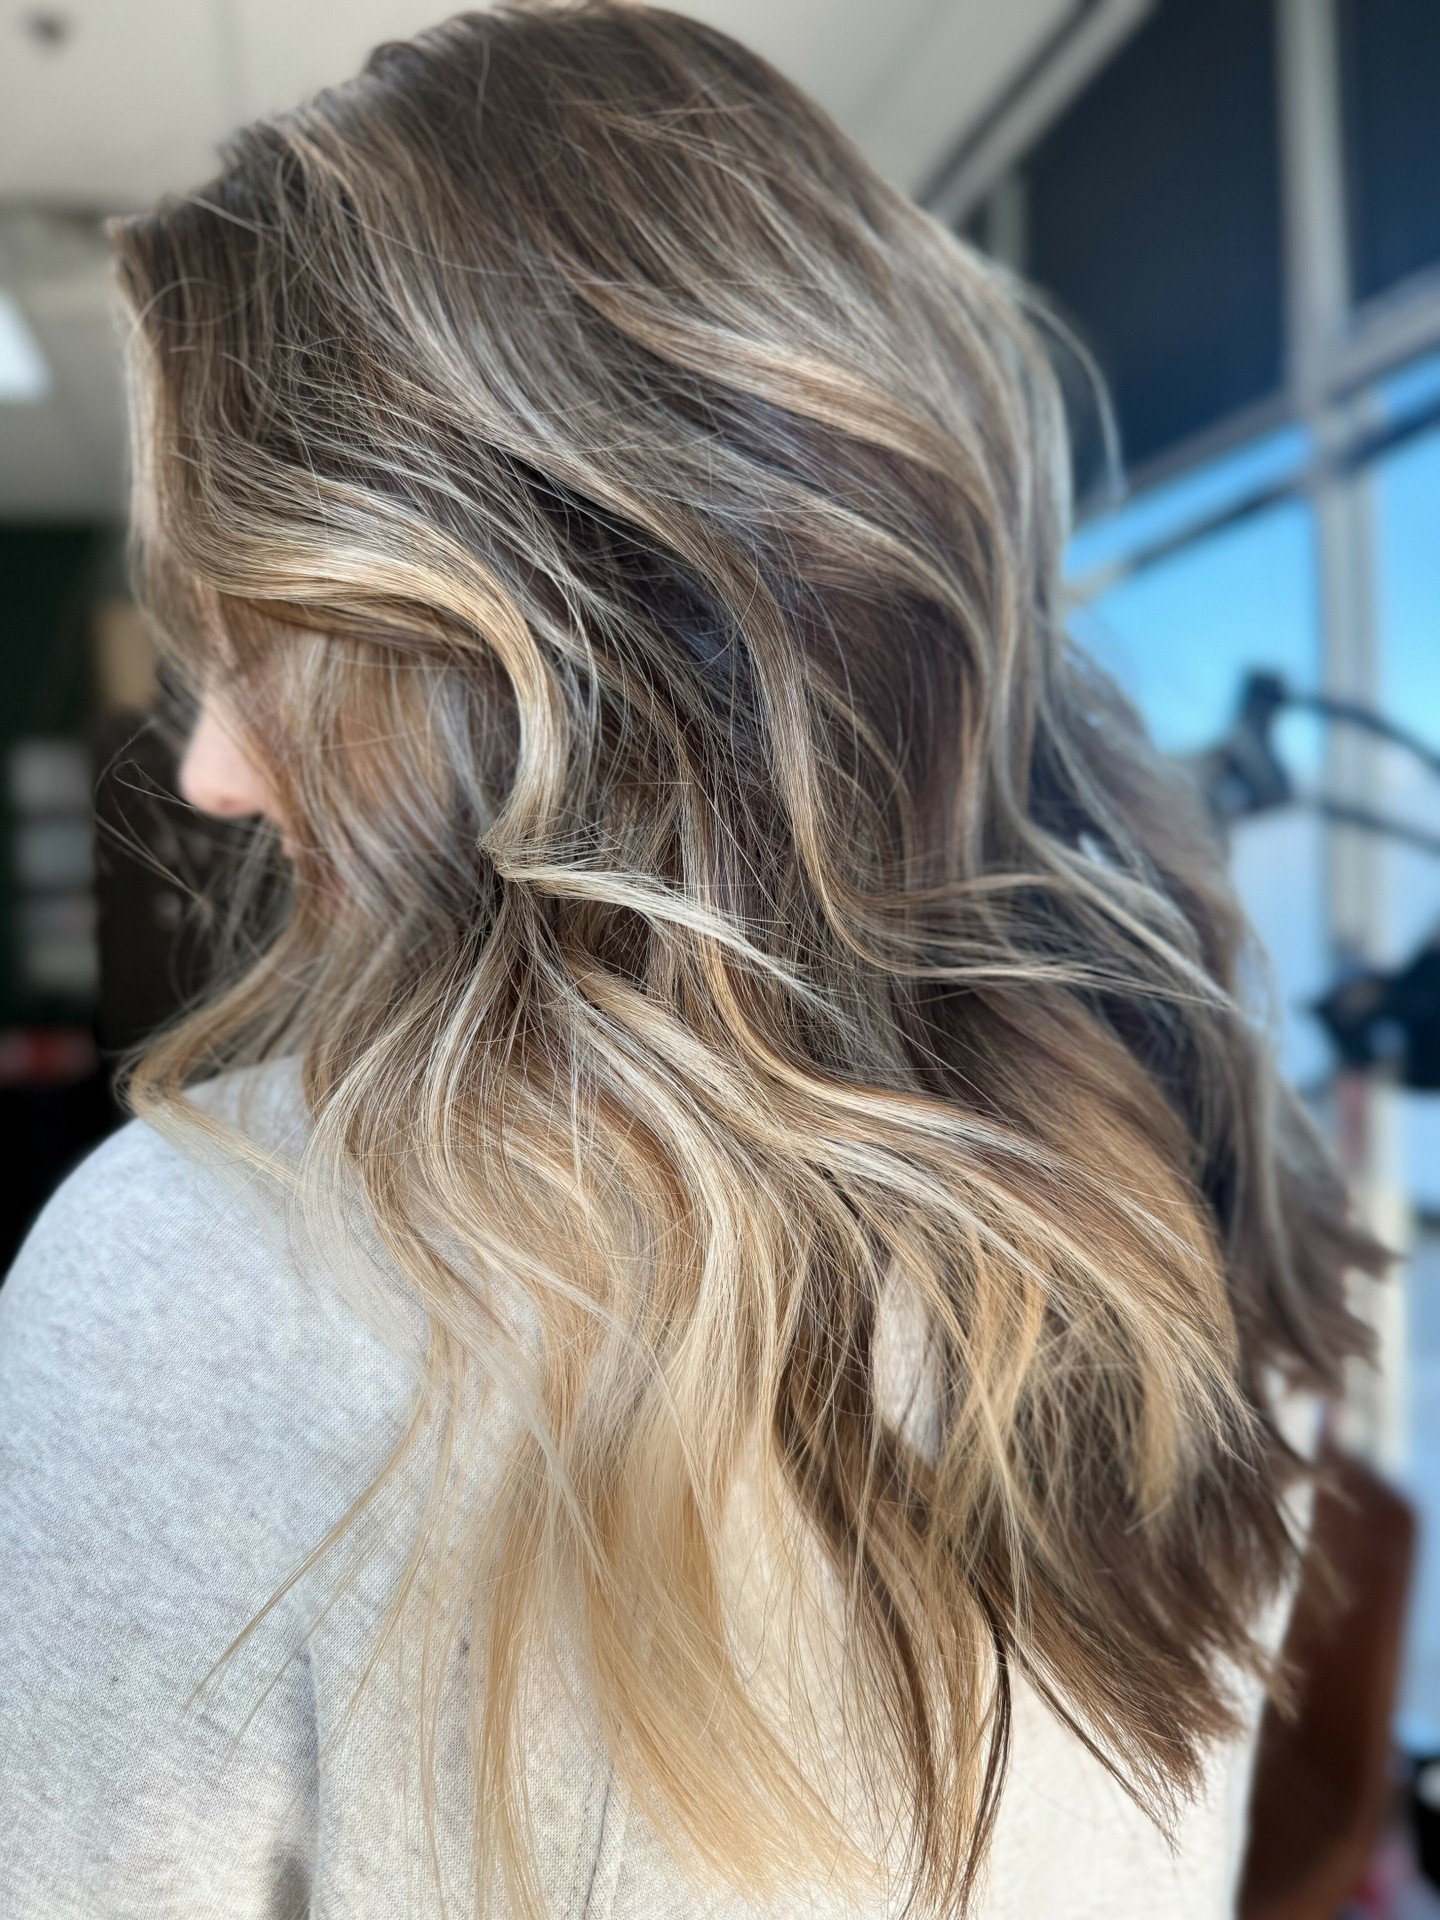 What we love about Bronde hair

1. It&rsquo;s low maintenance 
2. The dimension 
3. The light and the dark can either blend together creating an overall shift in color or, like in this photo, they can play together making the light look even lighter 